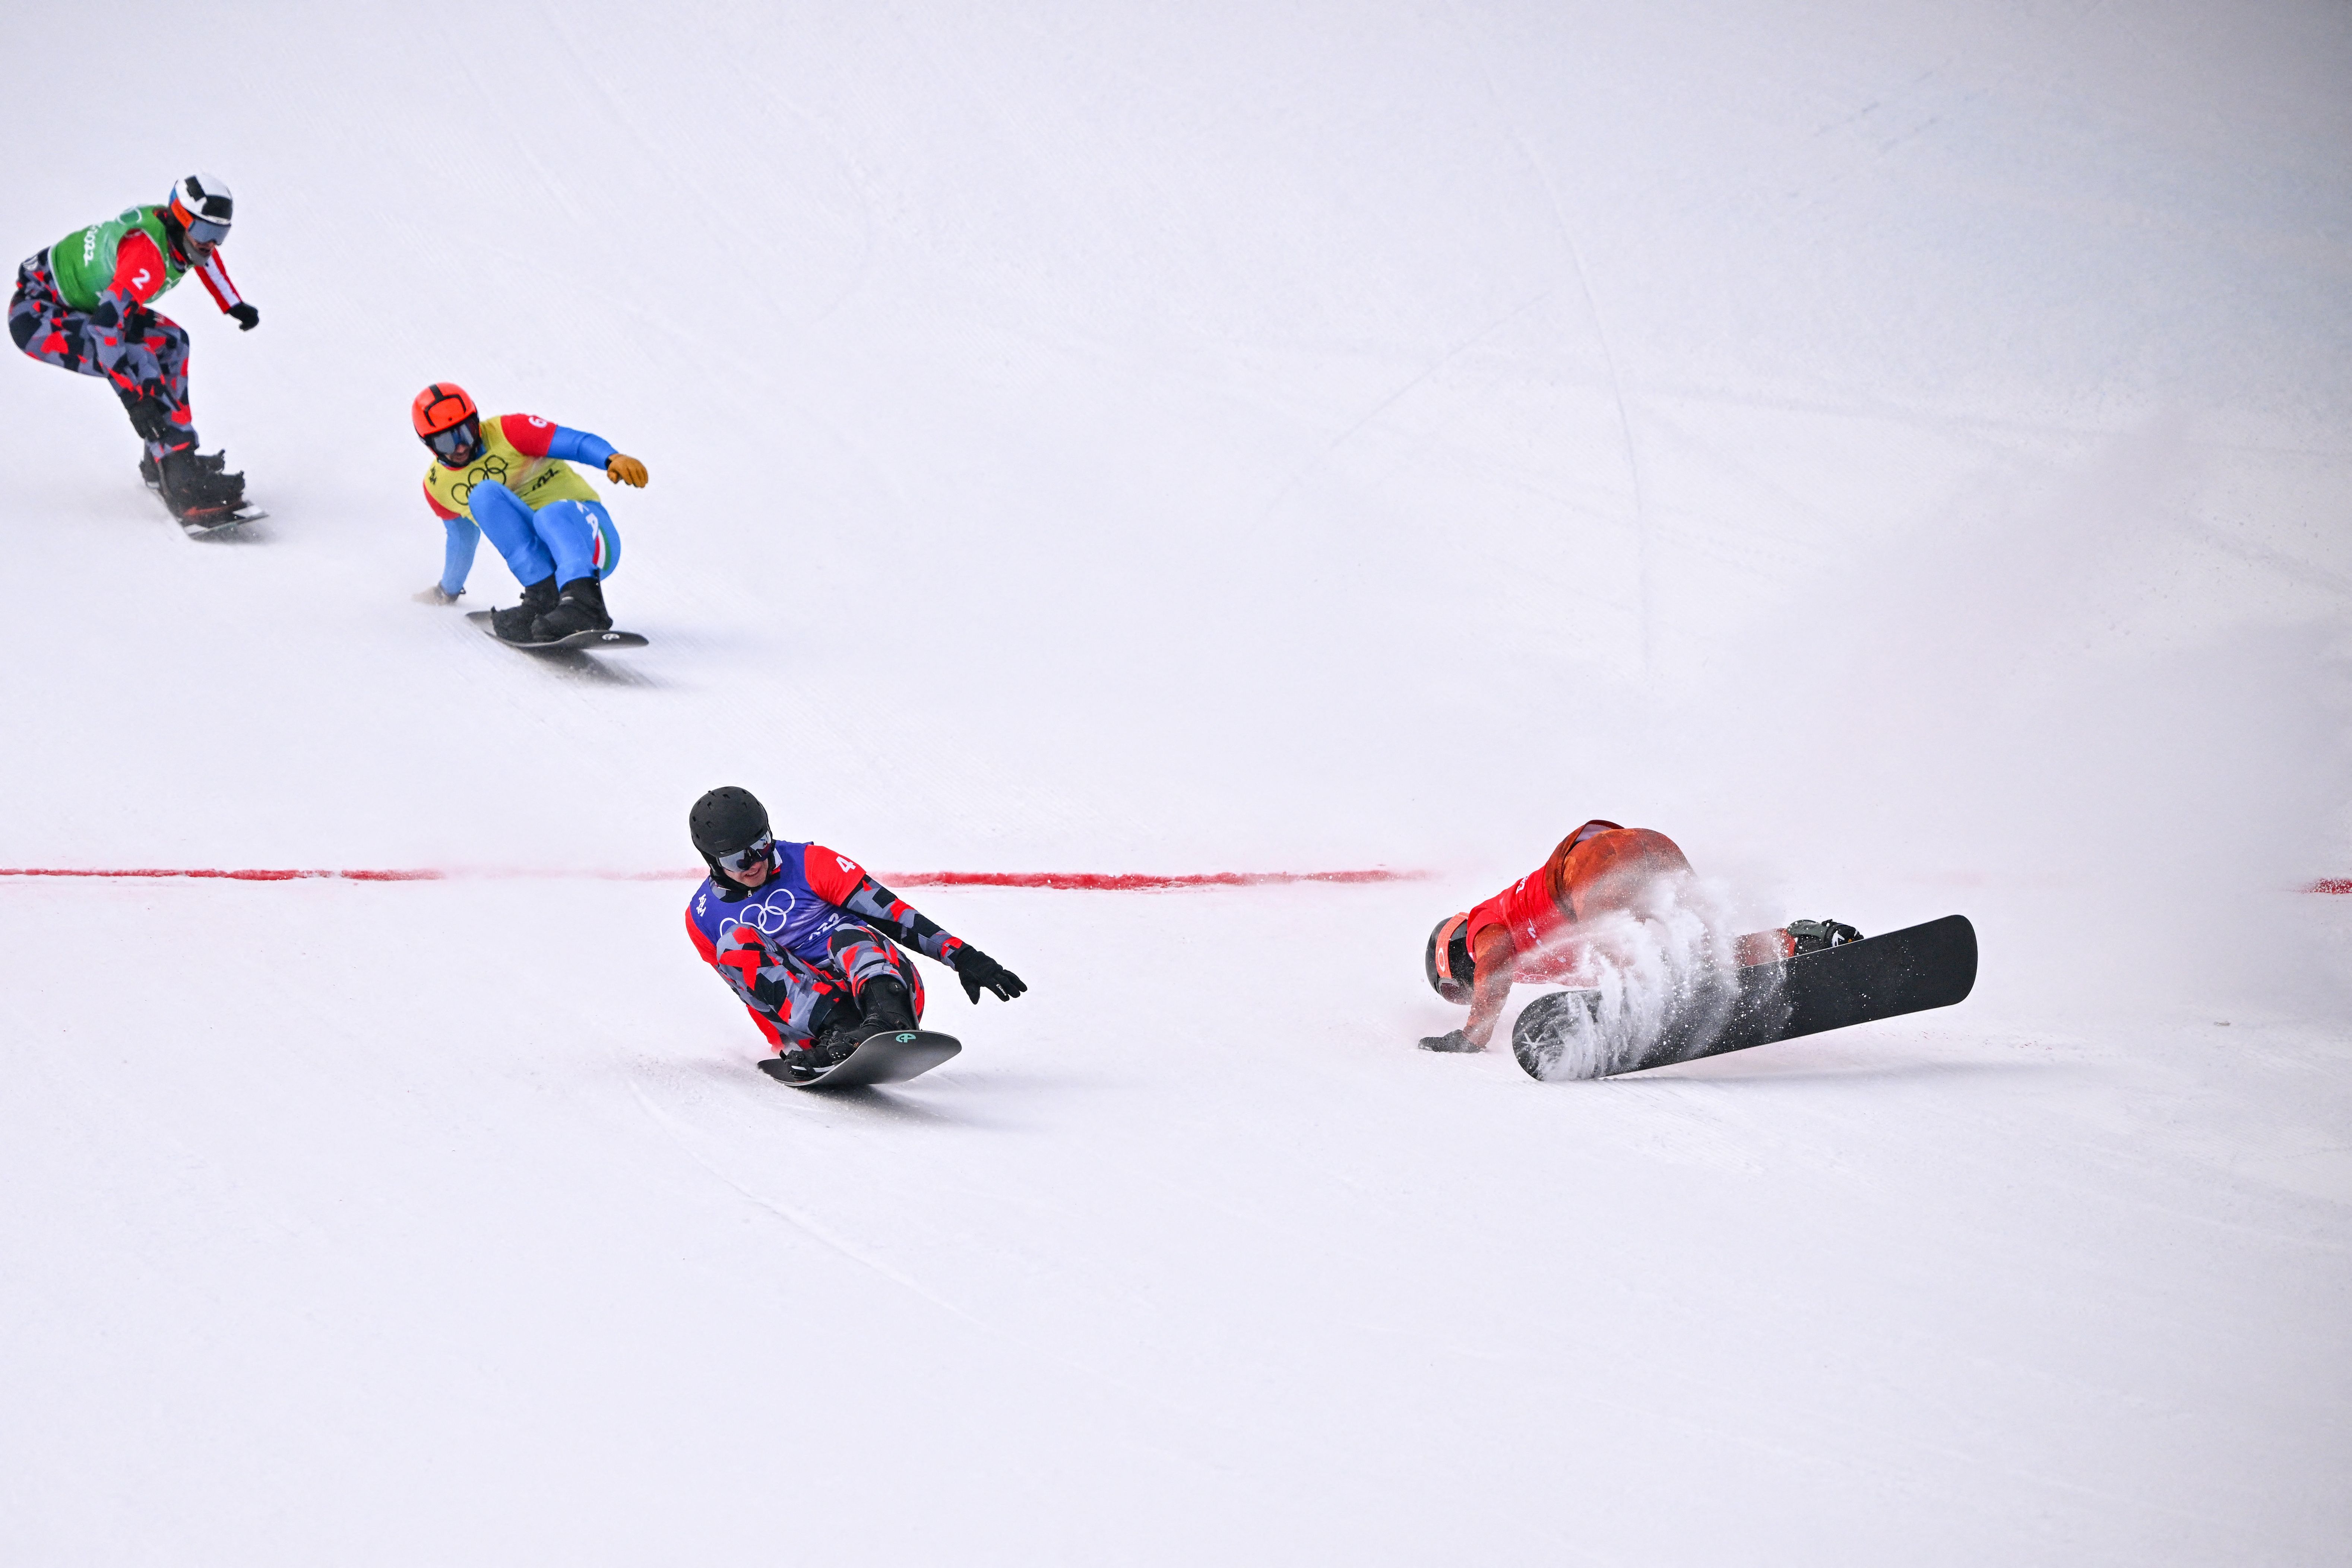 Austria's Alessandro Haemmerle (front L) crosses the finish line ahead of Canada's Eliot Grondin (R) to win the snowboard men's cross big final at the Beijing 2022 Winter Olympic Games 